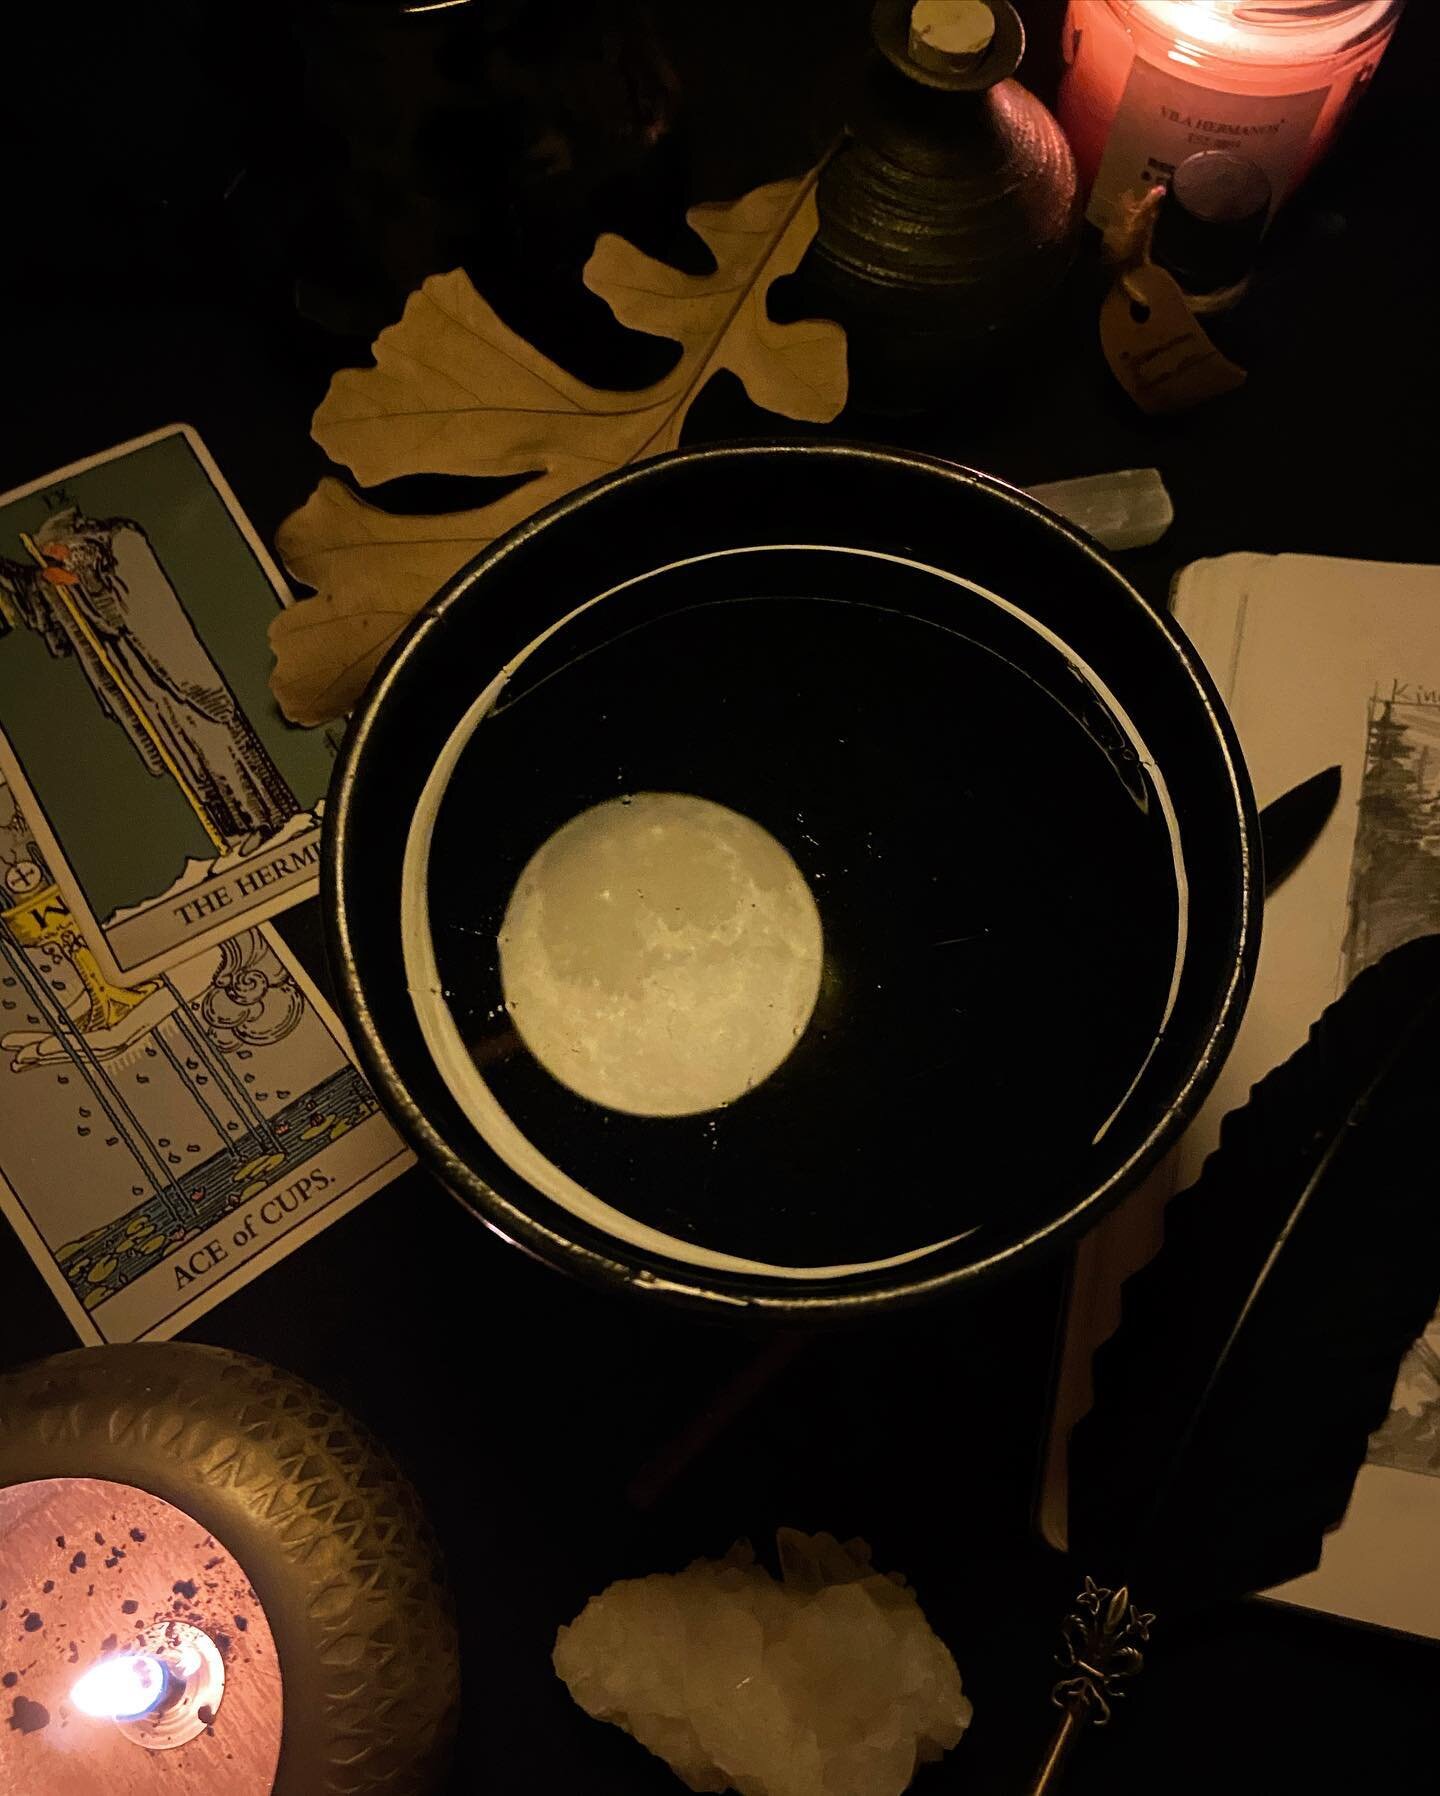 That&rsquo;s the way it goes 🌙🌑 Anyone else very ready for the new moon? #pottery #lunarphases #newmoonvibes #scryingbowl #moonlit #darkdecor #pottersofinstagram #tarot #darkacademia